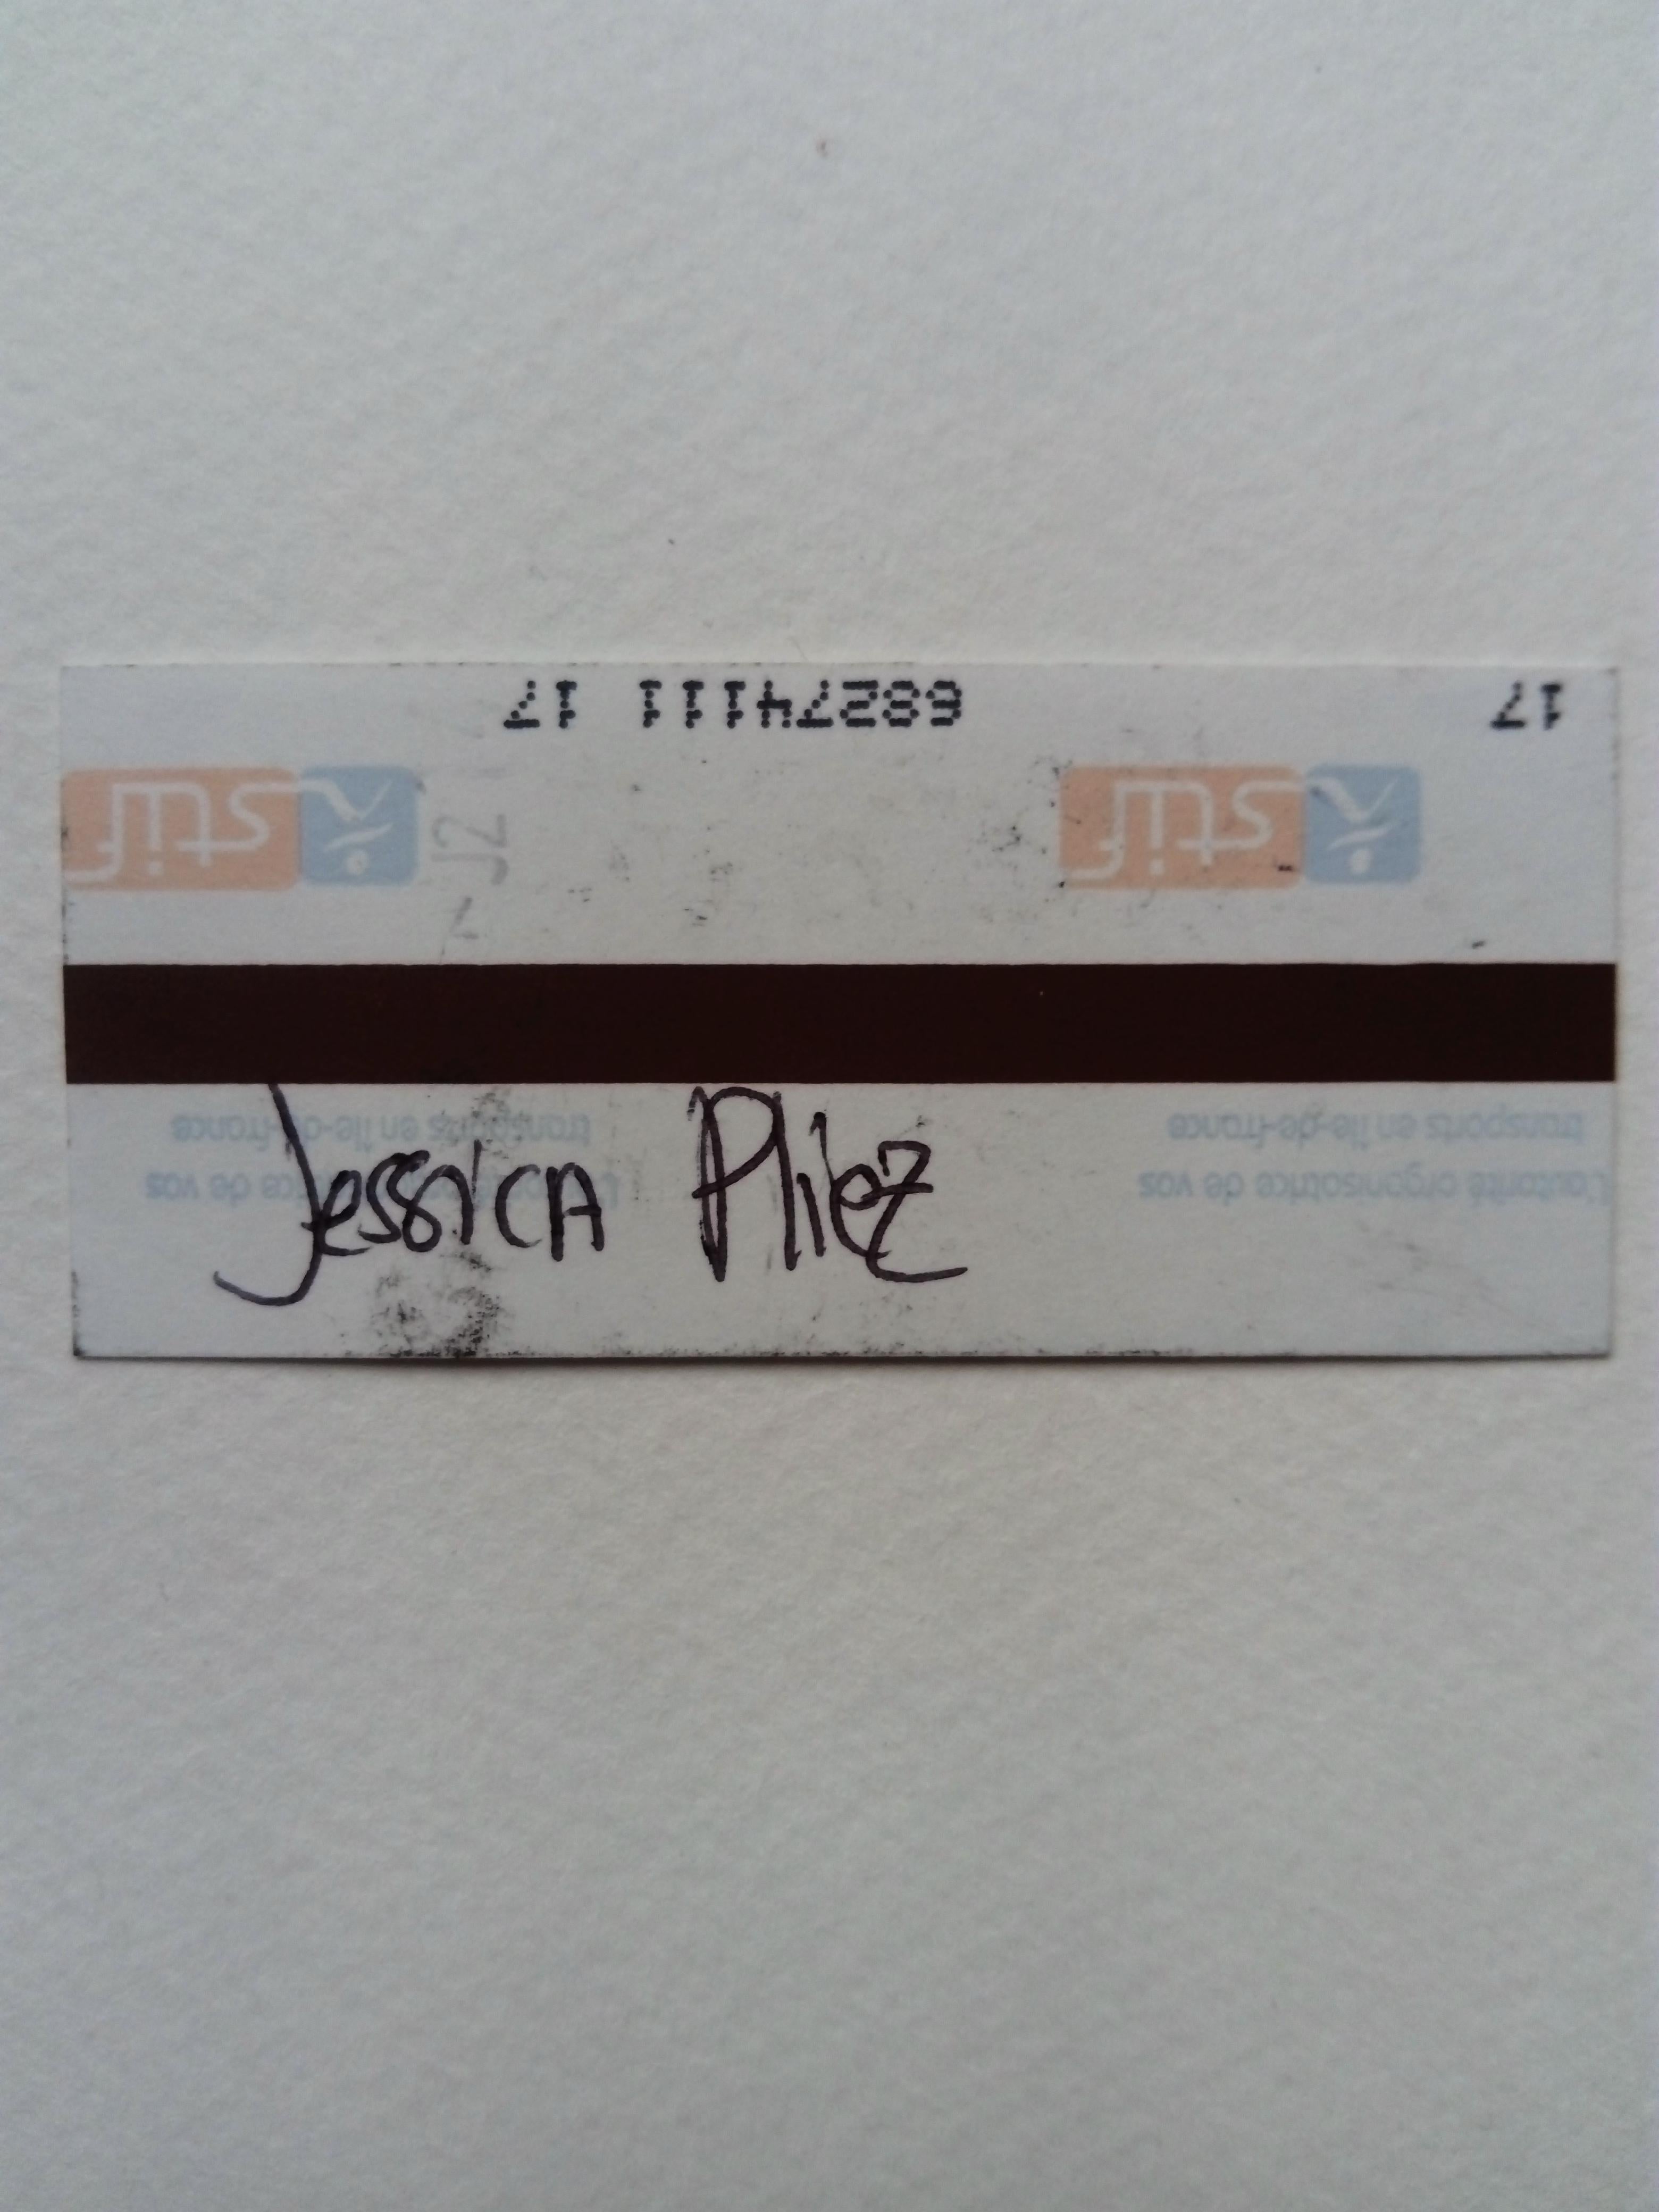 Jessica Pliez, artist in the poetic and infantile world, which reminds one of the filmmaker Tim Burton, loves the surprising supports, like here a series made on subway tickets.


Punk
2018
Black felt on subway ticket
7 x 3 cm
Original signed